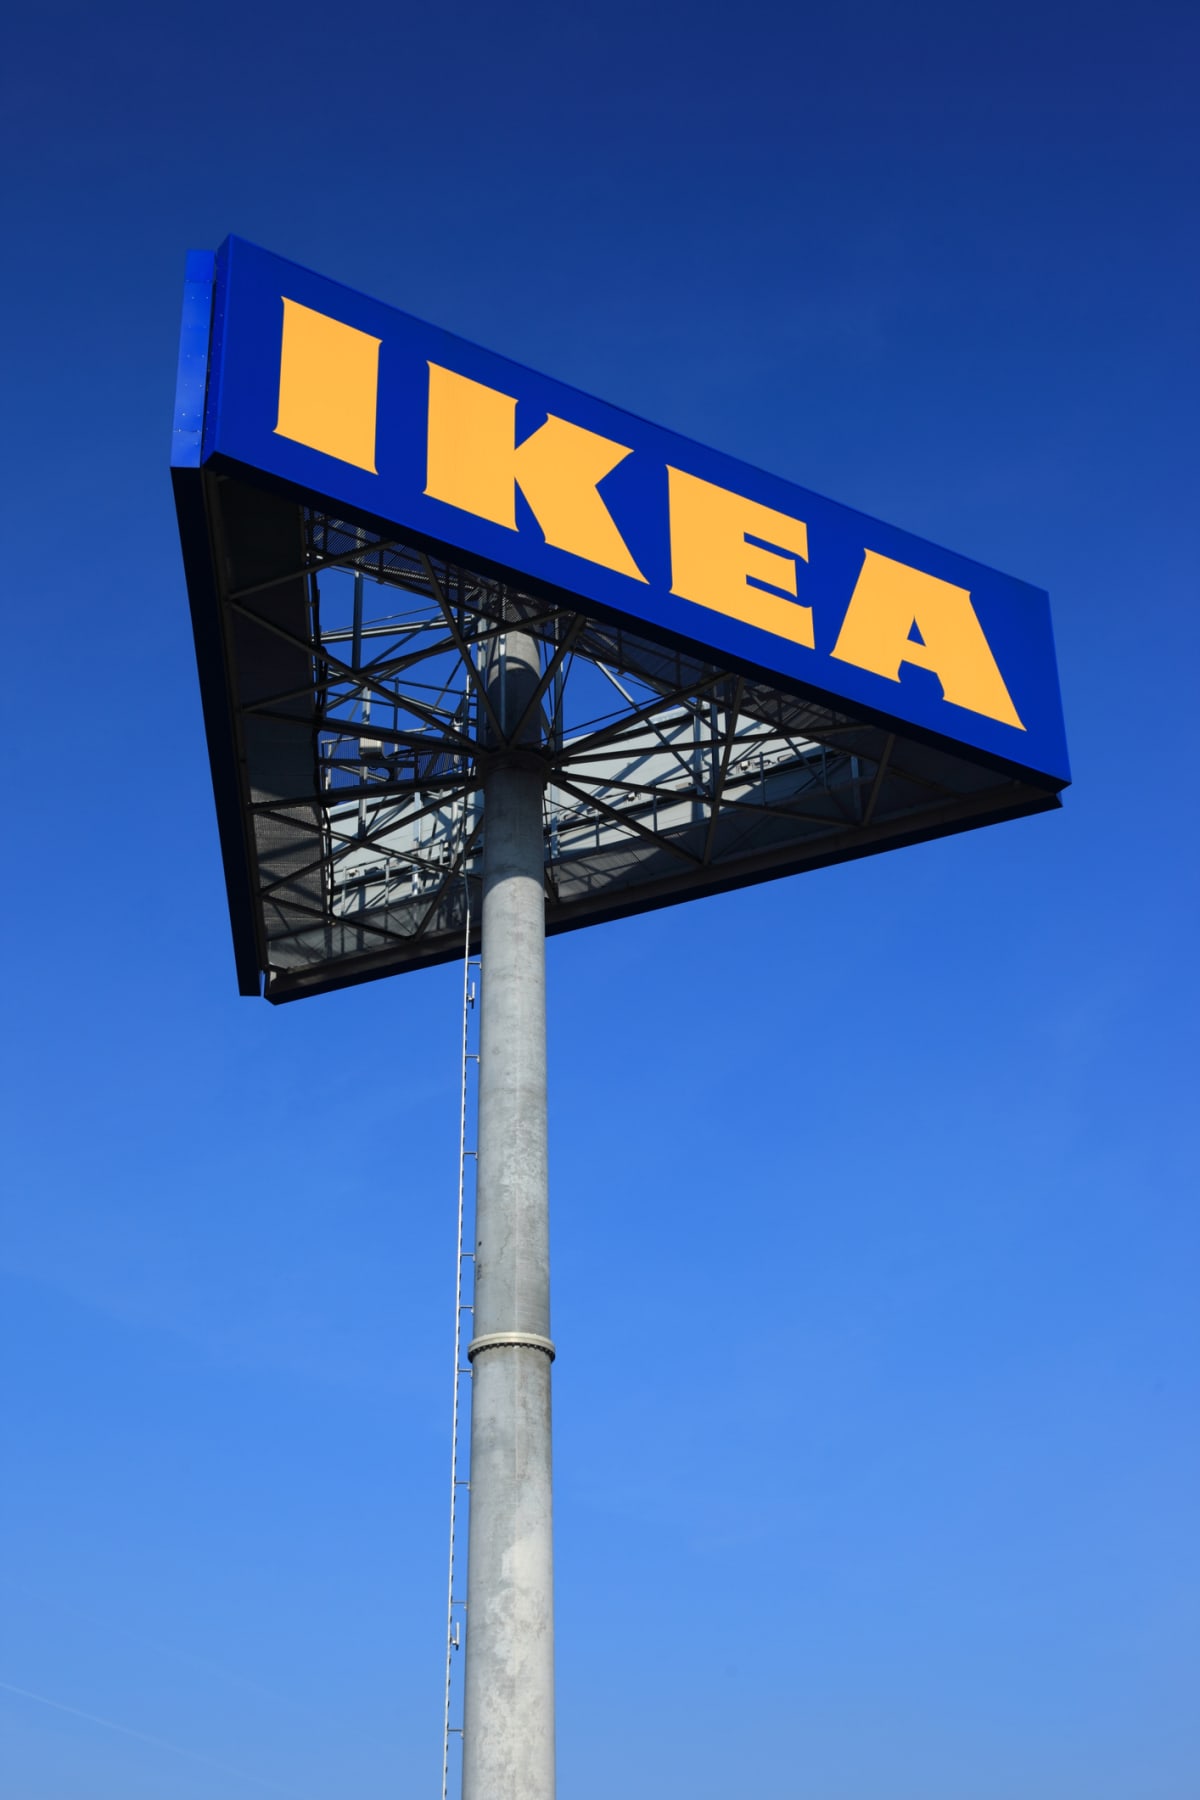 Lodz, Poland - March, 4 2011: The IKEA logo is shown outside the company's store.